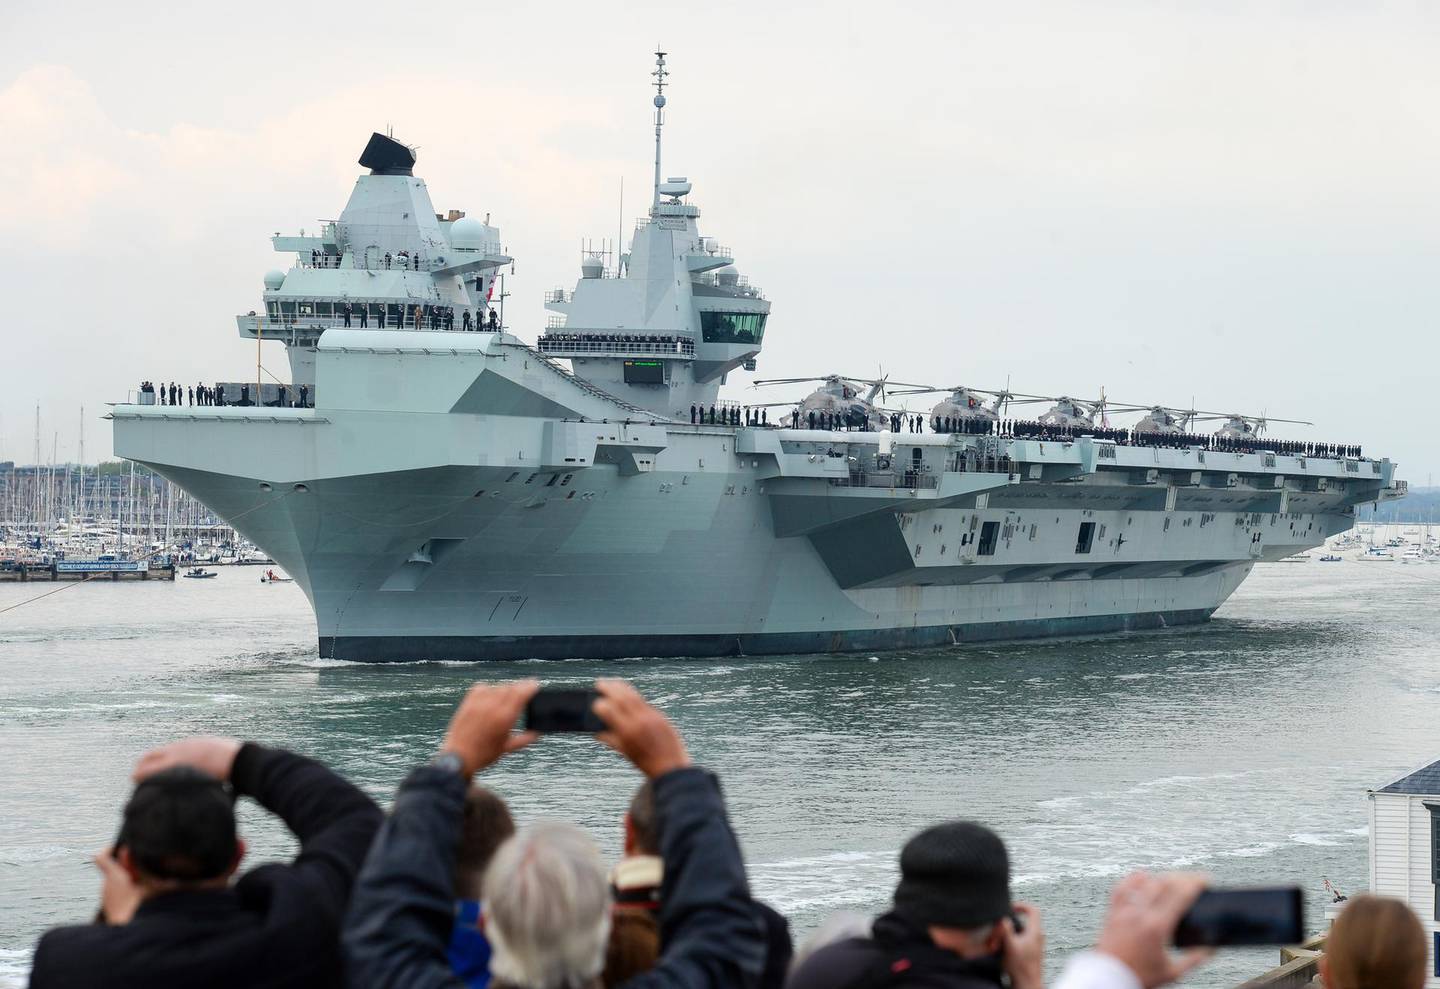 PORTSMOUTH, ENGLAND - MAY 01: HMS Queen Elizabeth leaves Portsmouth on May 01, 2021 in Portsmouth, United Kingdom. The UKâ€™s Carrier Strike Group, led by aircraft carrier HMS Queen Elizabeth, will visit more than one fifth of the worldâ€™s nations during the deployment. The task group will visit 40 nations covering 26,000 nautical miles. Joining HMS Queen Elizabeth on her maiden deployment are destroyers HMS Diamond and Defender, frigates HMS Richmond and Kent, an Astute-class submarine in support and Royal Fleet Auxiliary support ships RFA Fort Victoria and RFA Tidespring. (Photo by Finnbarr Webster/Getty Images)